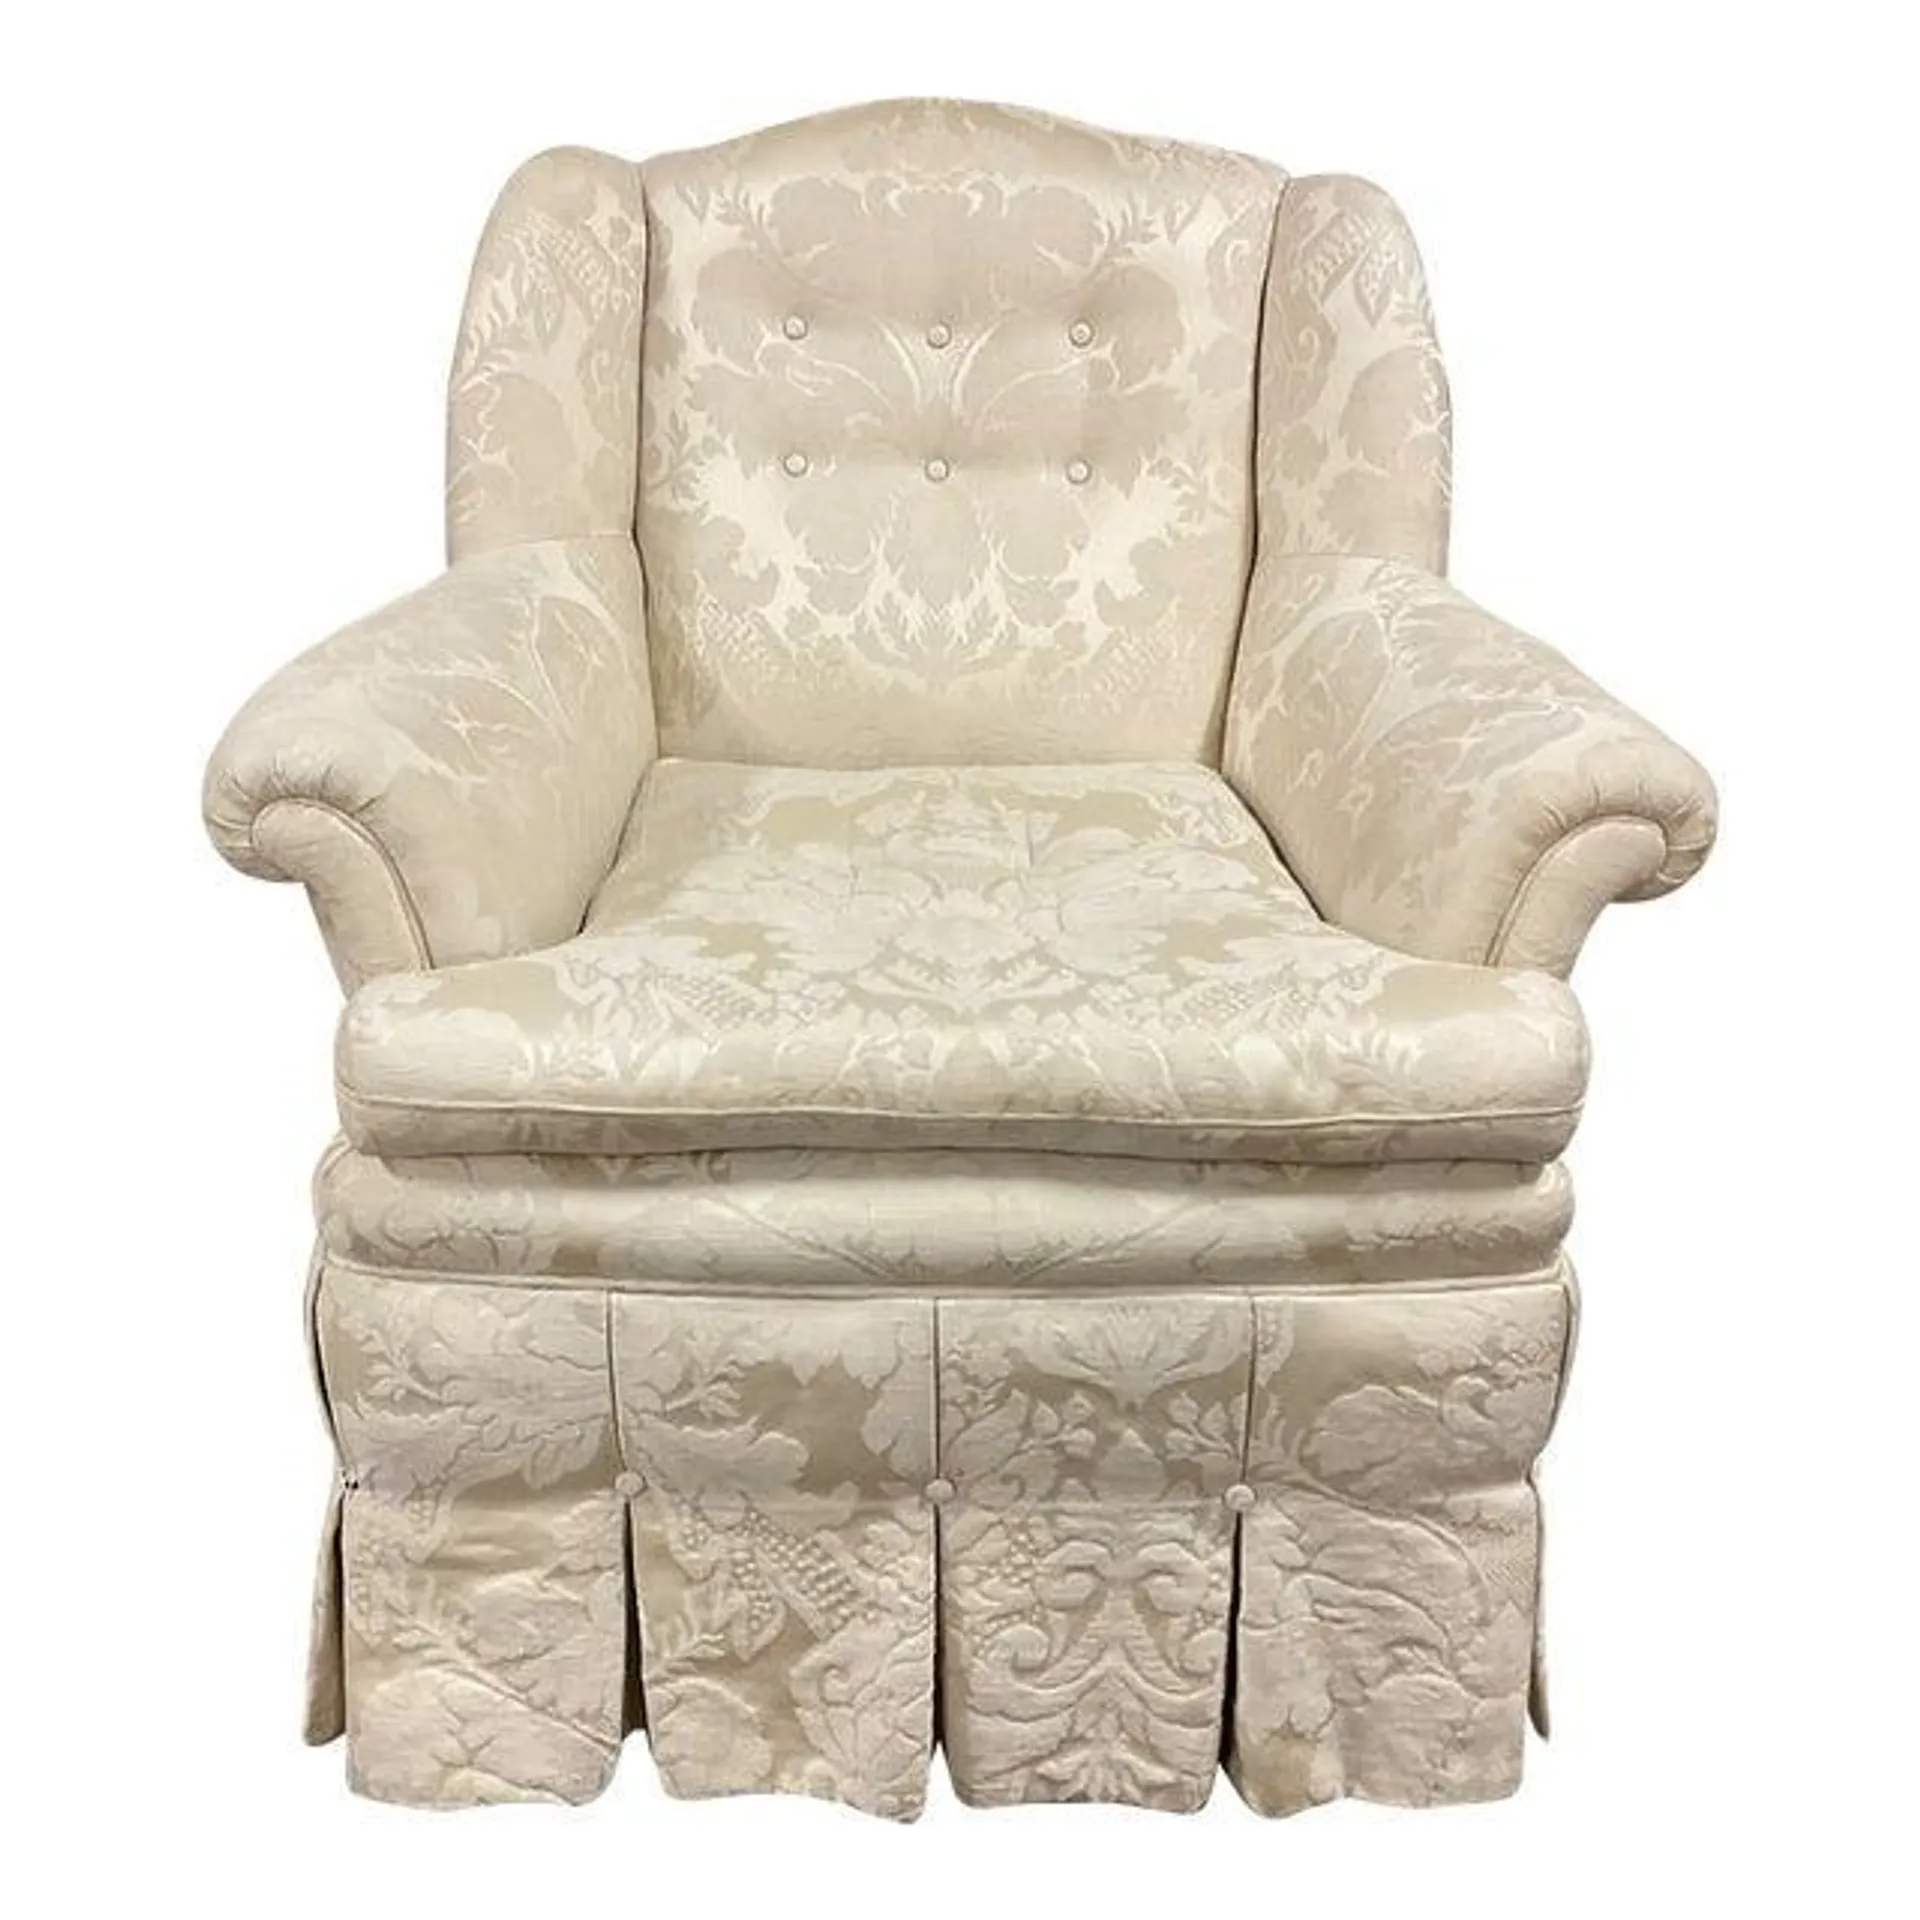 1980s Baker Furniture Ivory Damask Silk Side Club Chair.